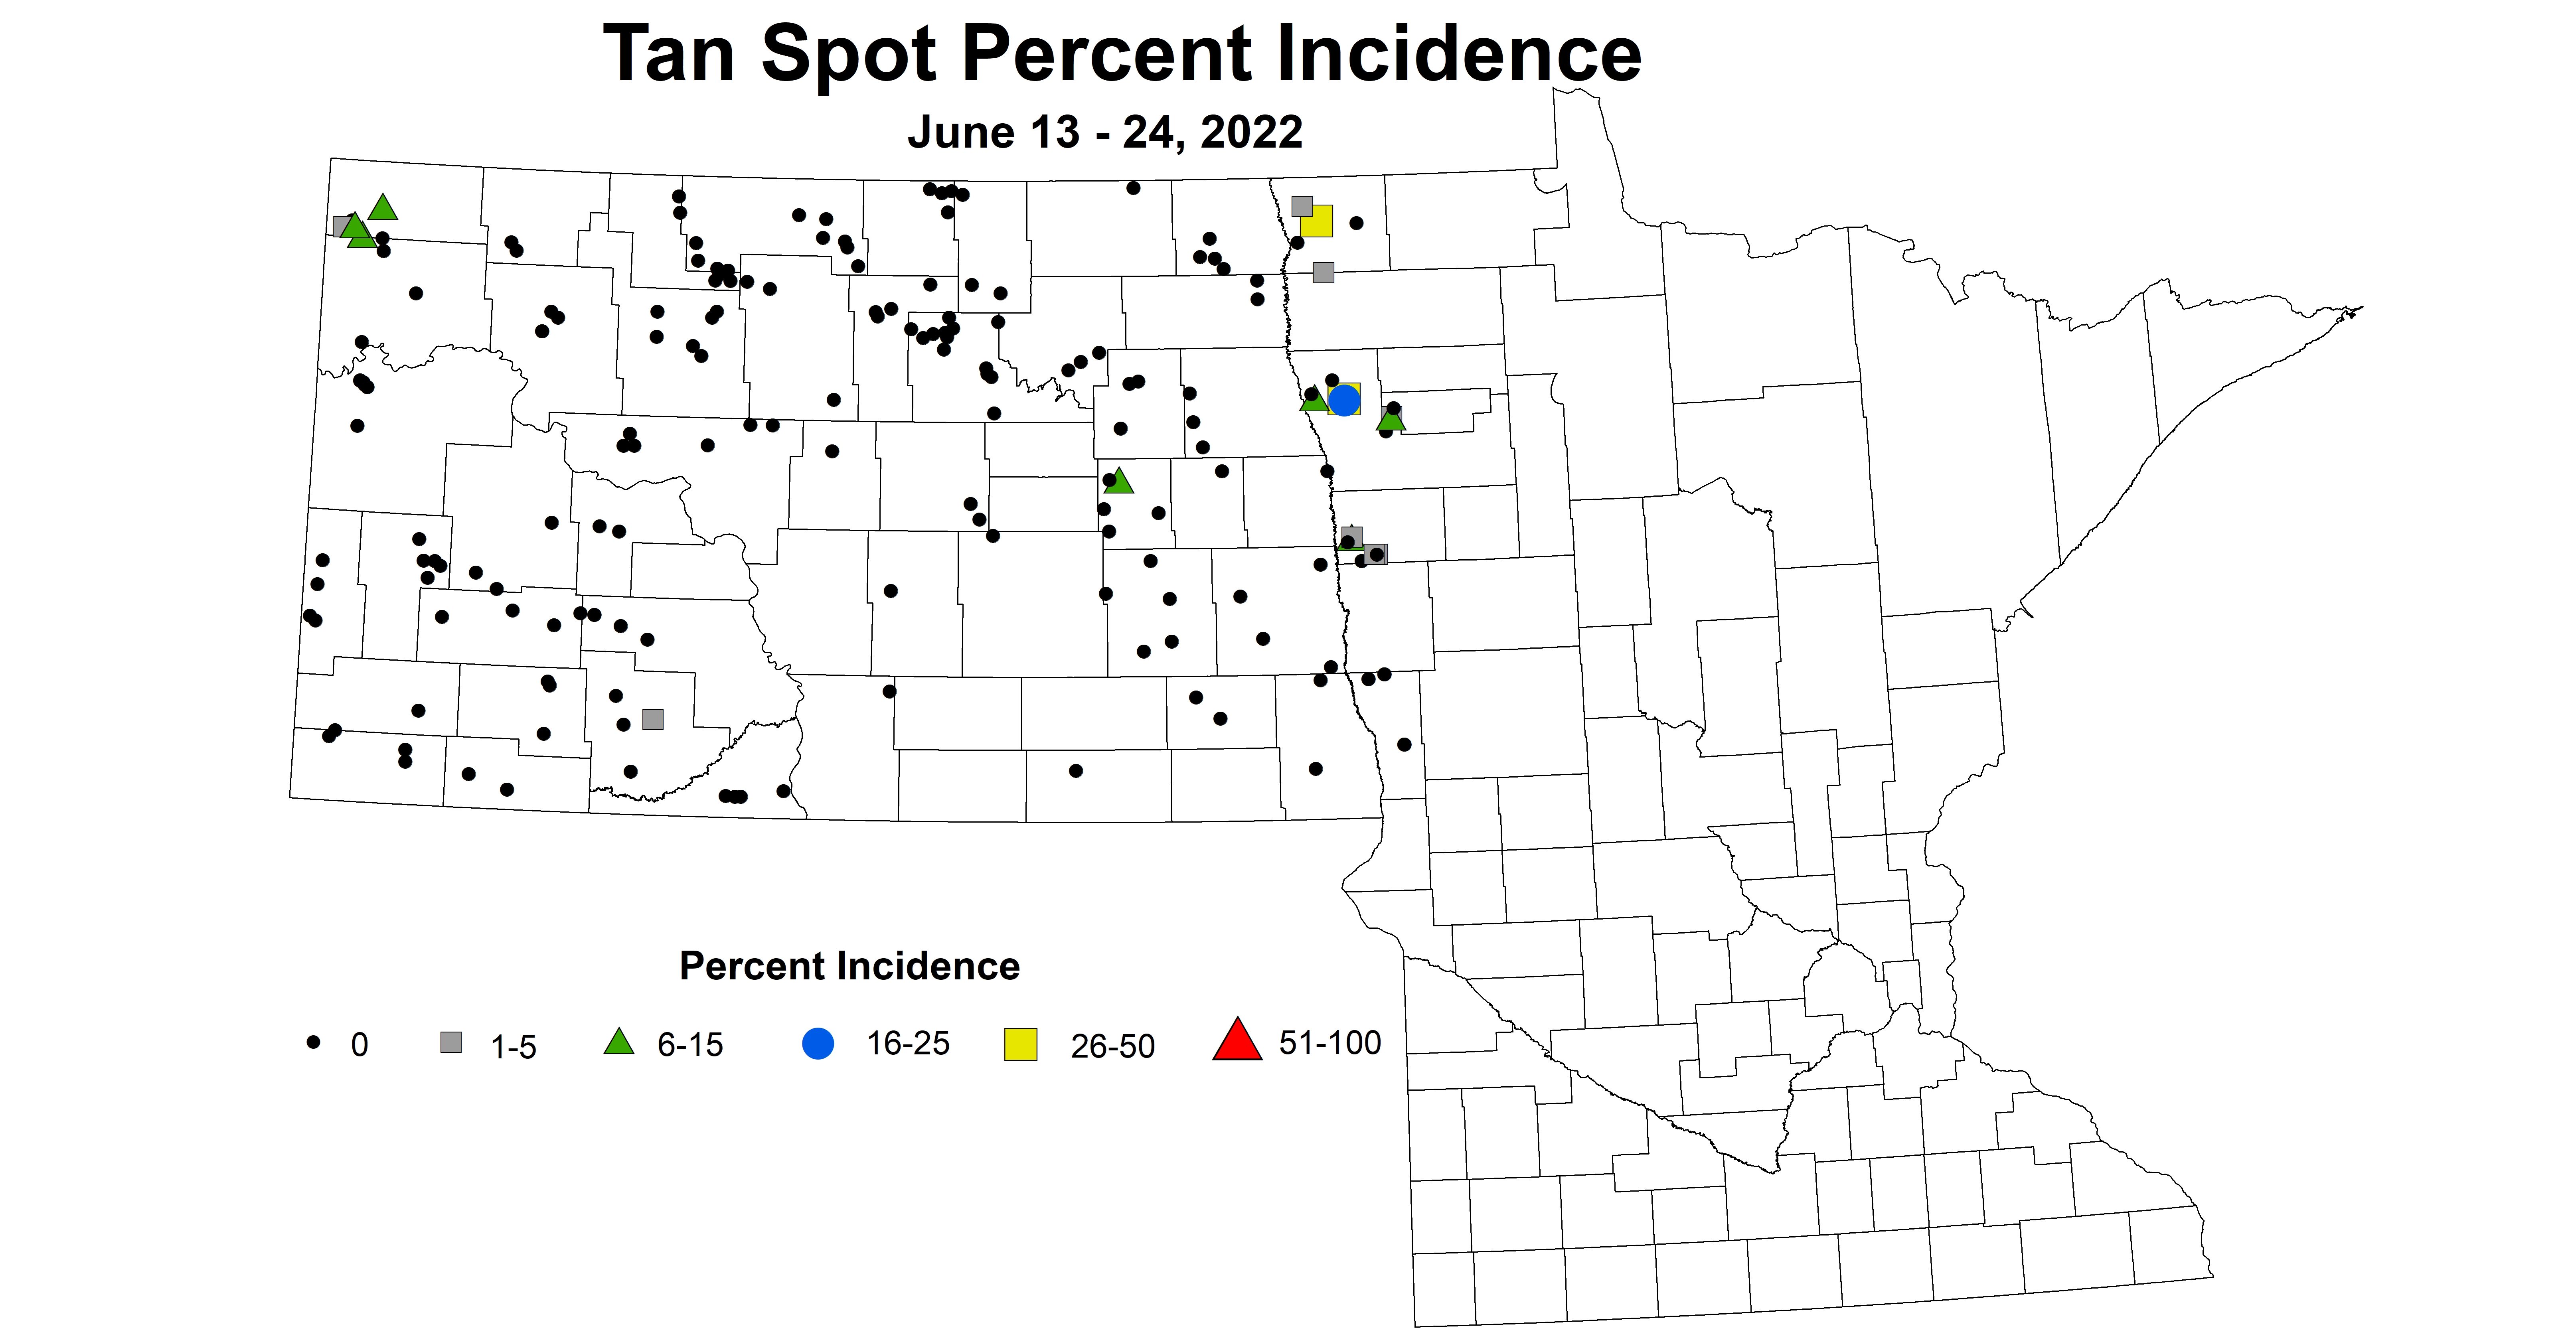 ND IPM map of wheat tan spot incidence June 13-24, 2022